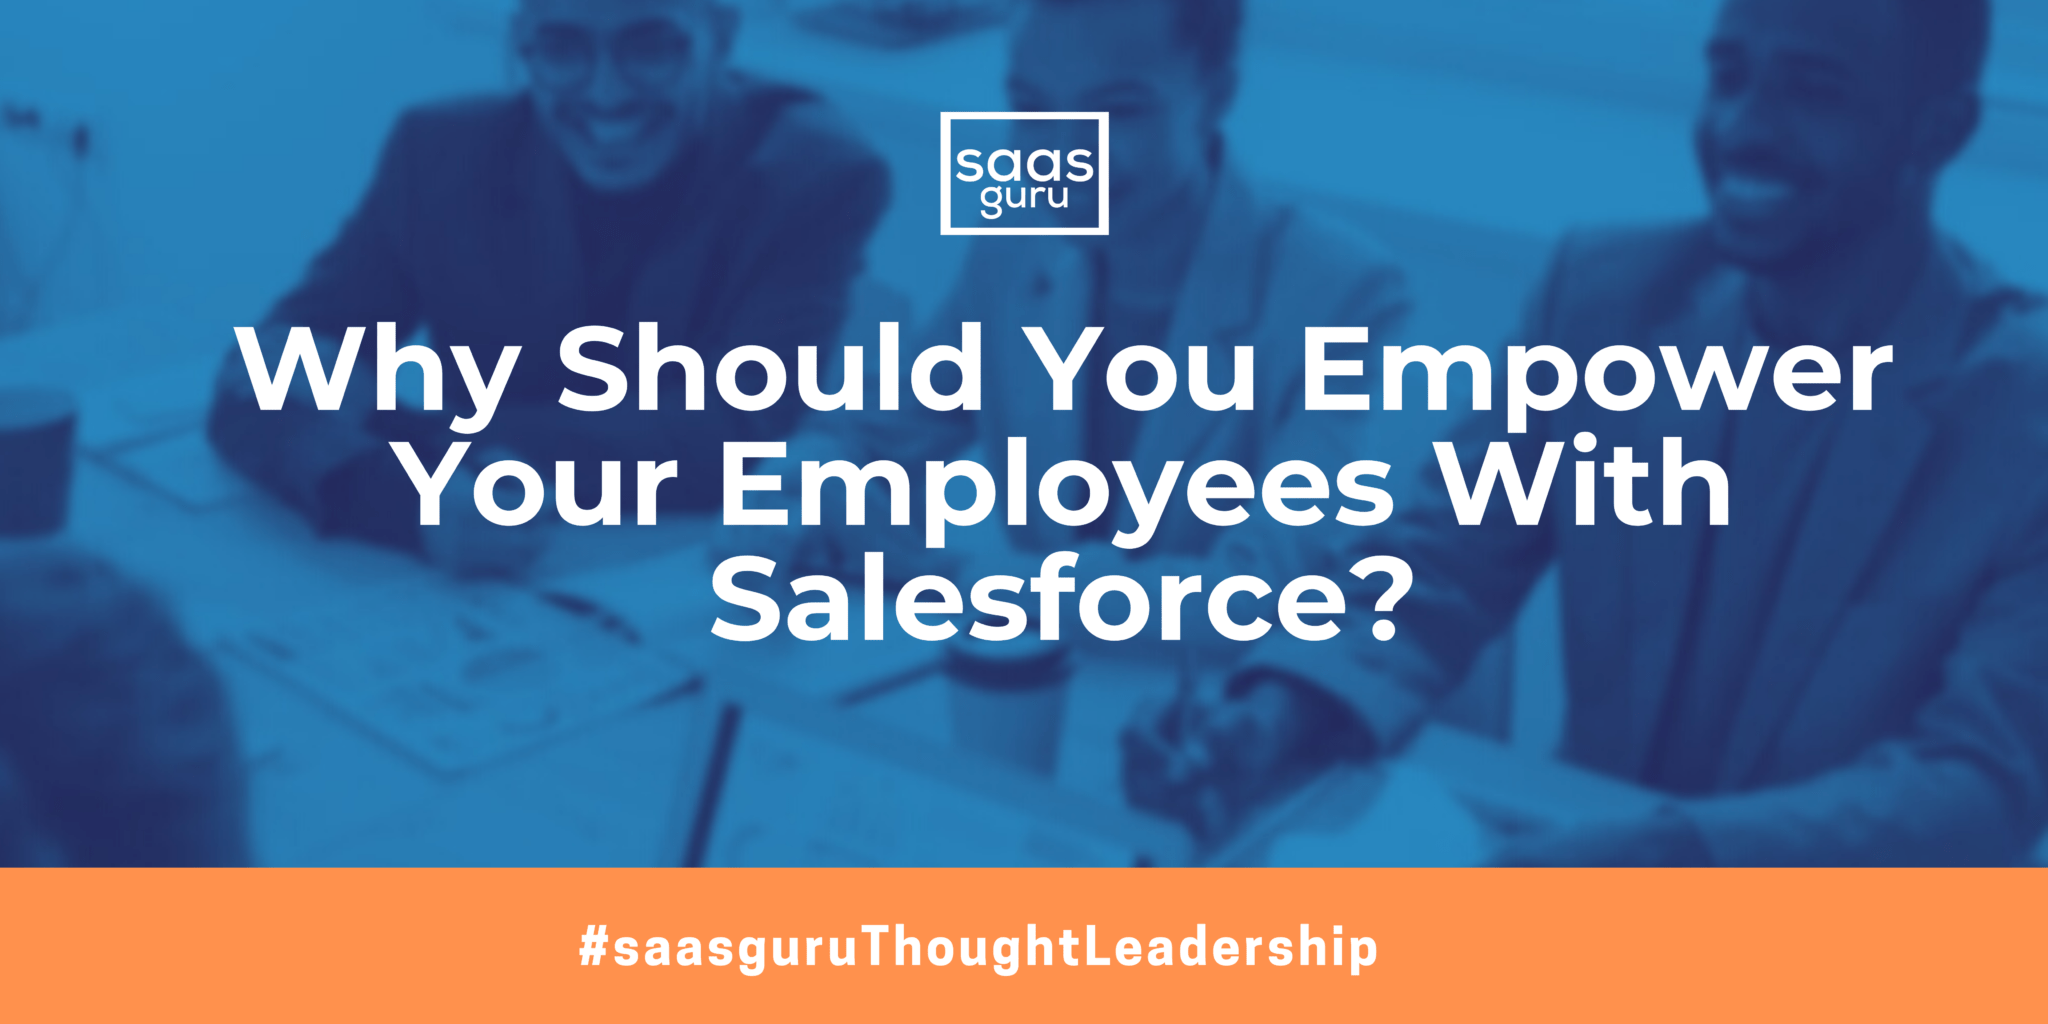 Why Should You Empower Your Employees With Salesforce?